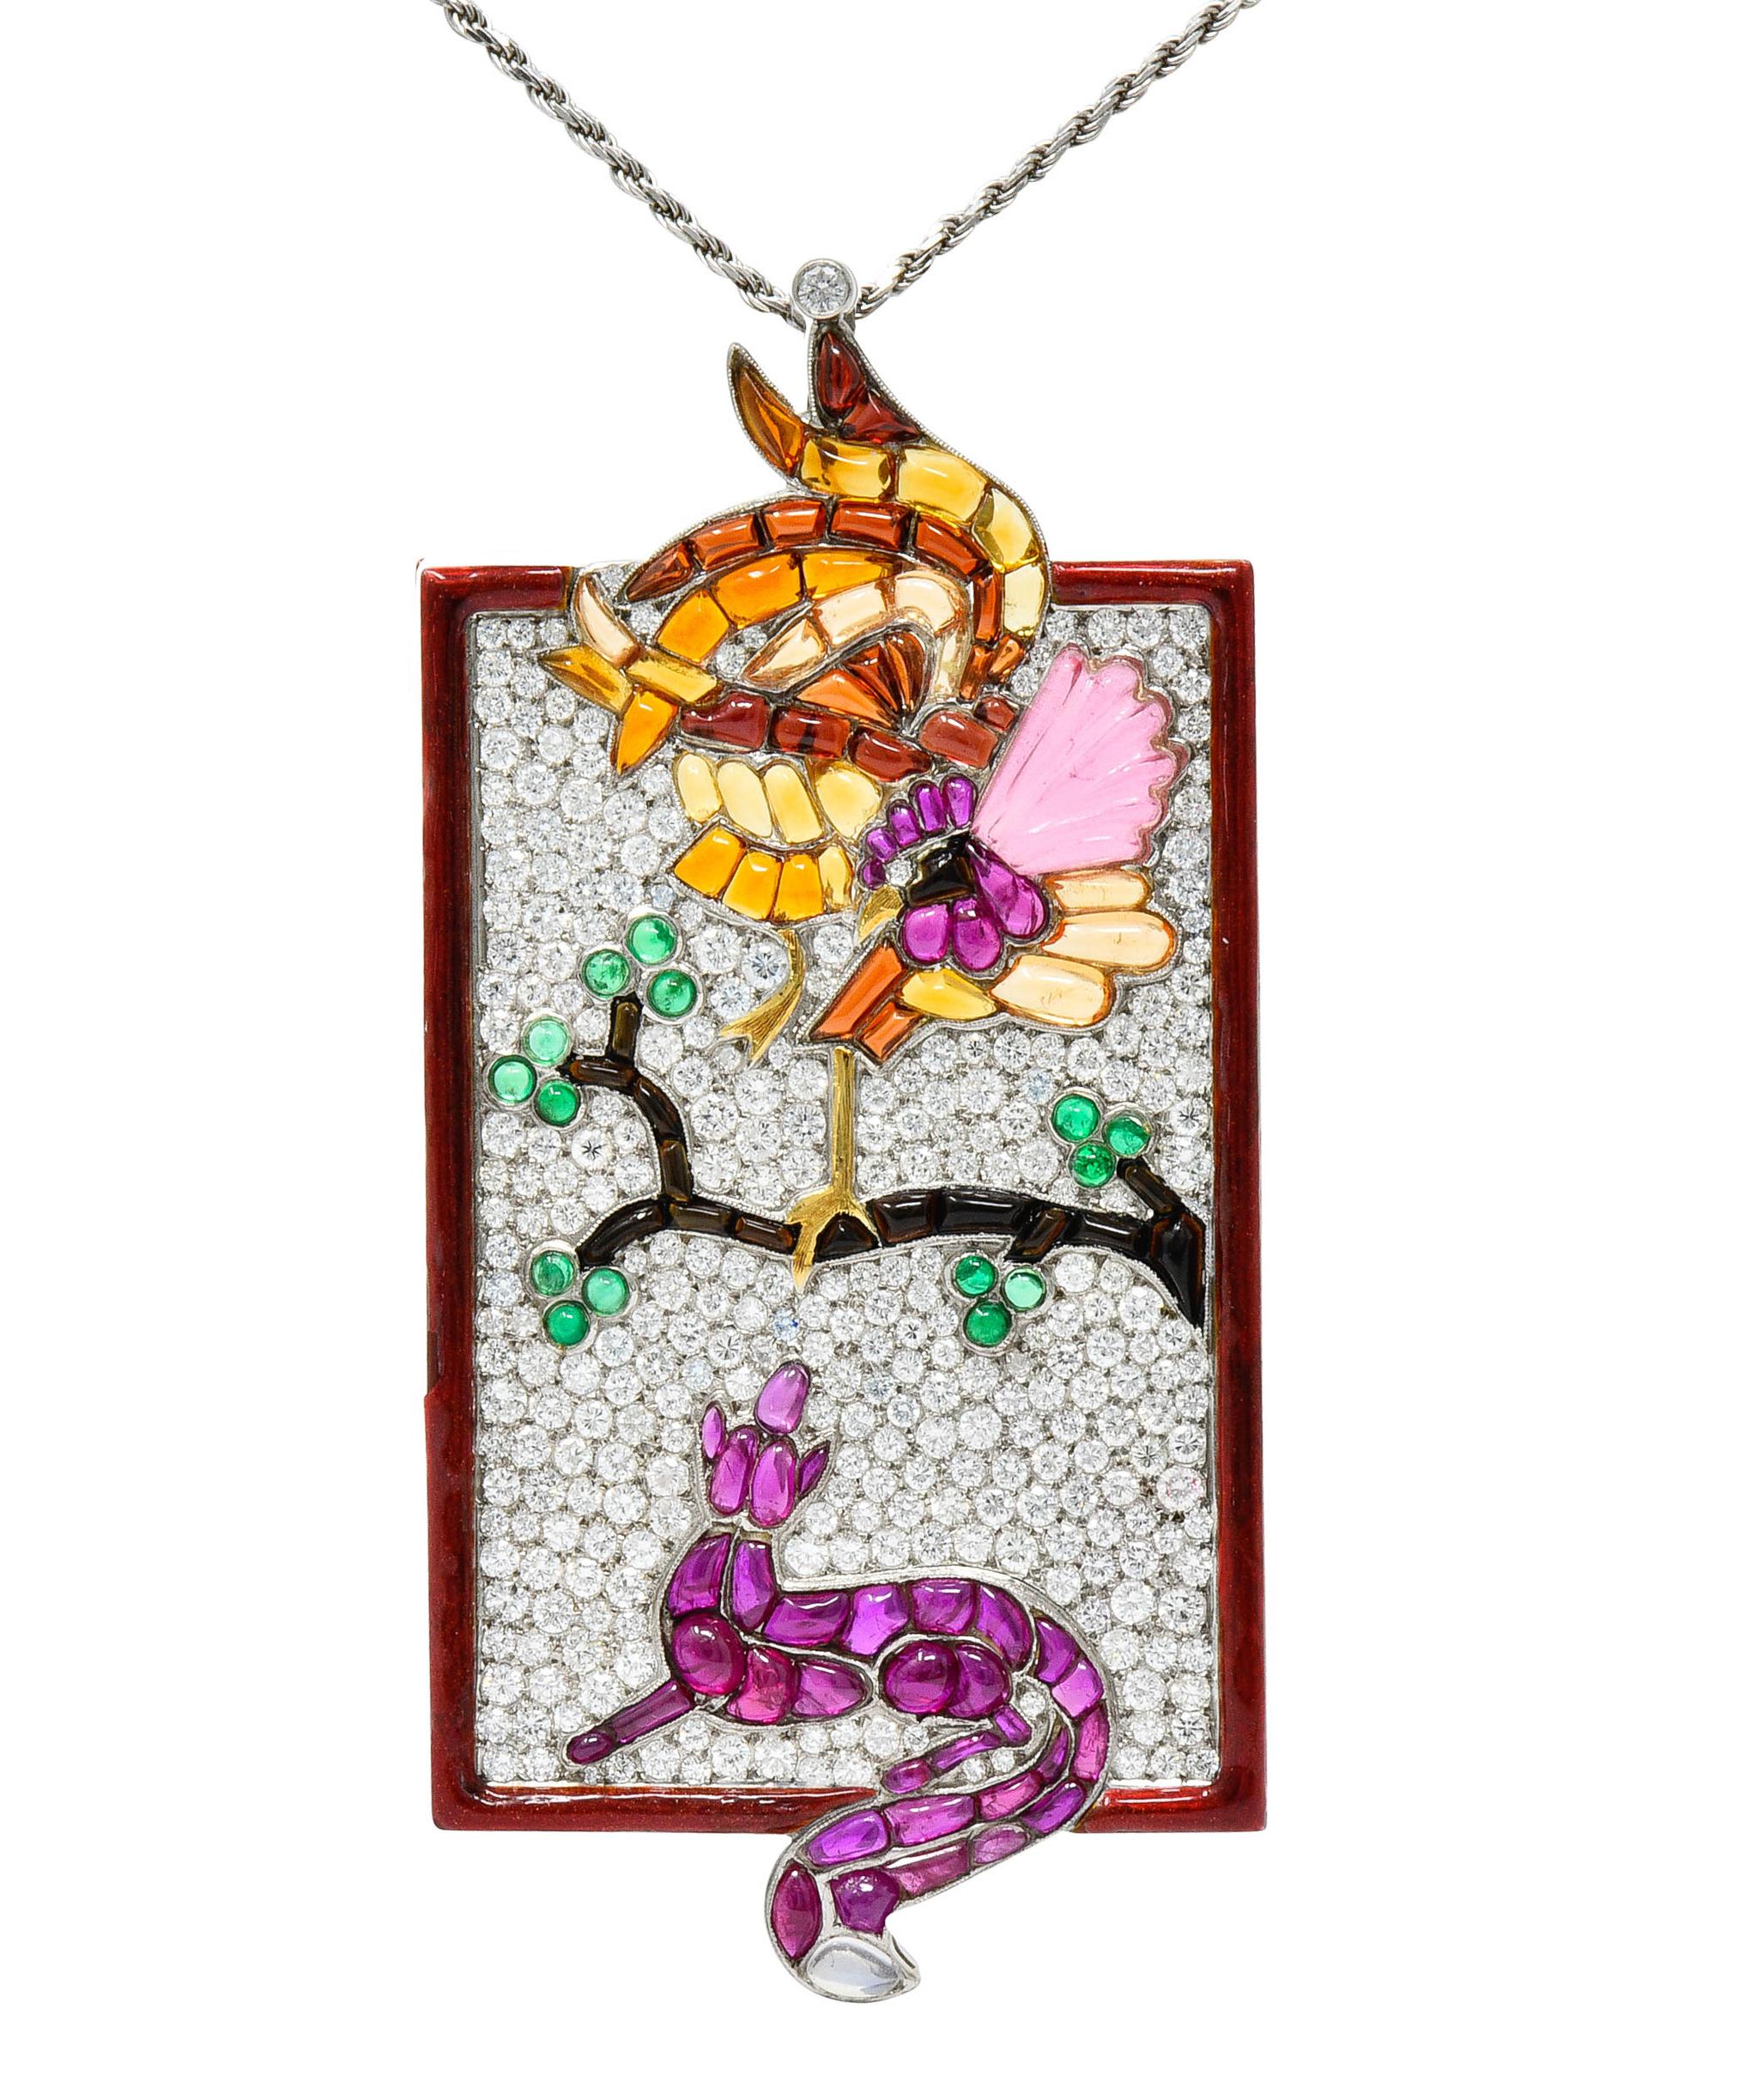 Large rectangular pavè diamond pendant depicts a fanciful scene of a fox provoking a bristled rooster

Rooster and fox are comprised of moonstones, rubies, sapphires, emeralds, onyx, and others

Cabochon calibrè cut to fit together in a colorful